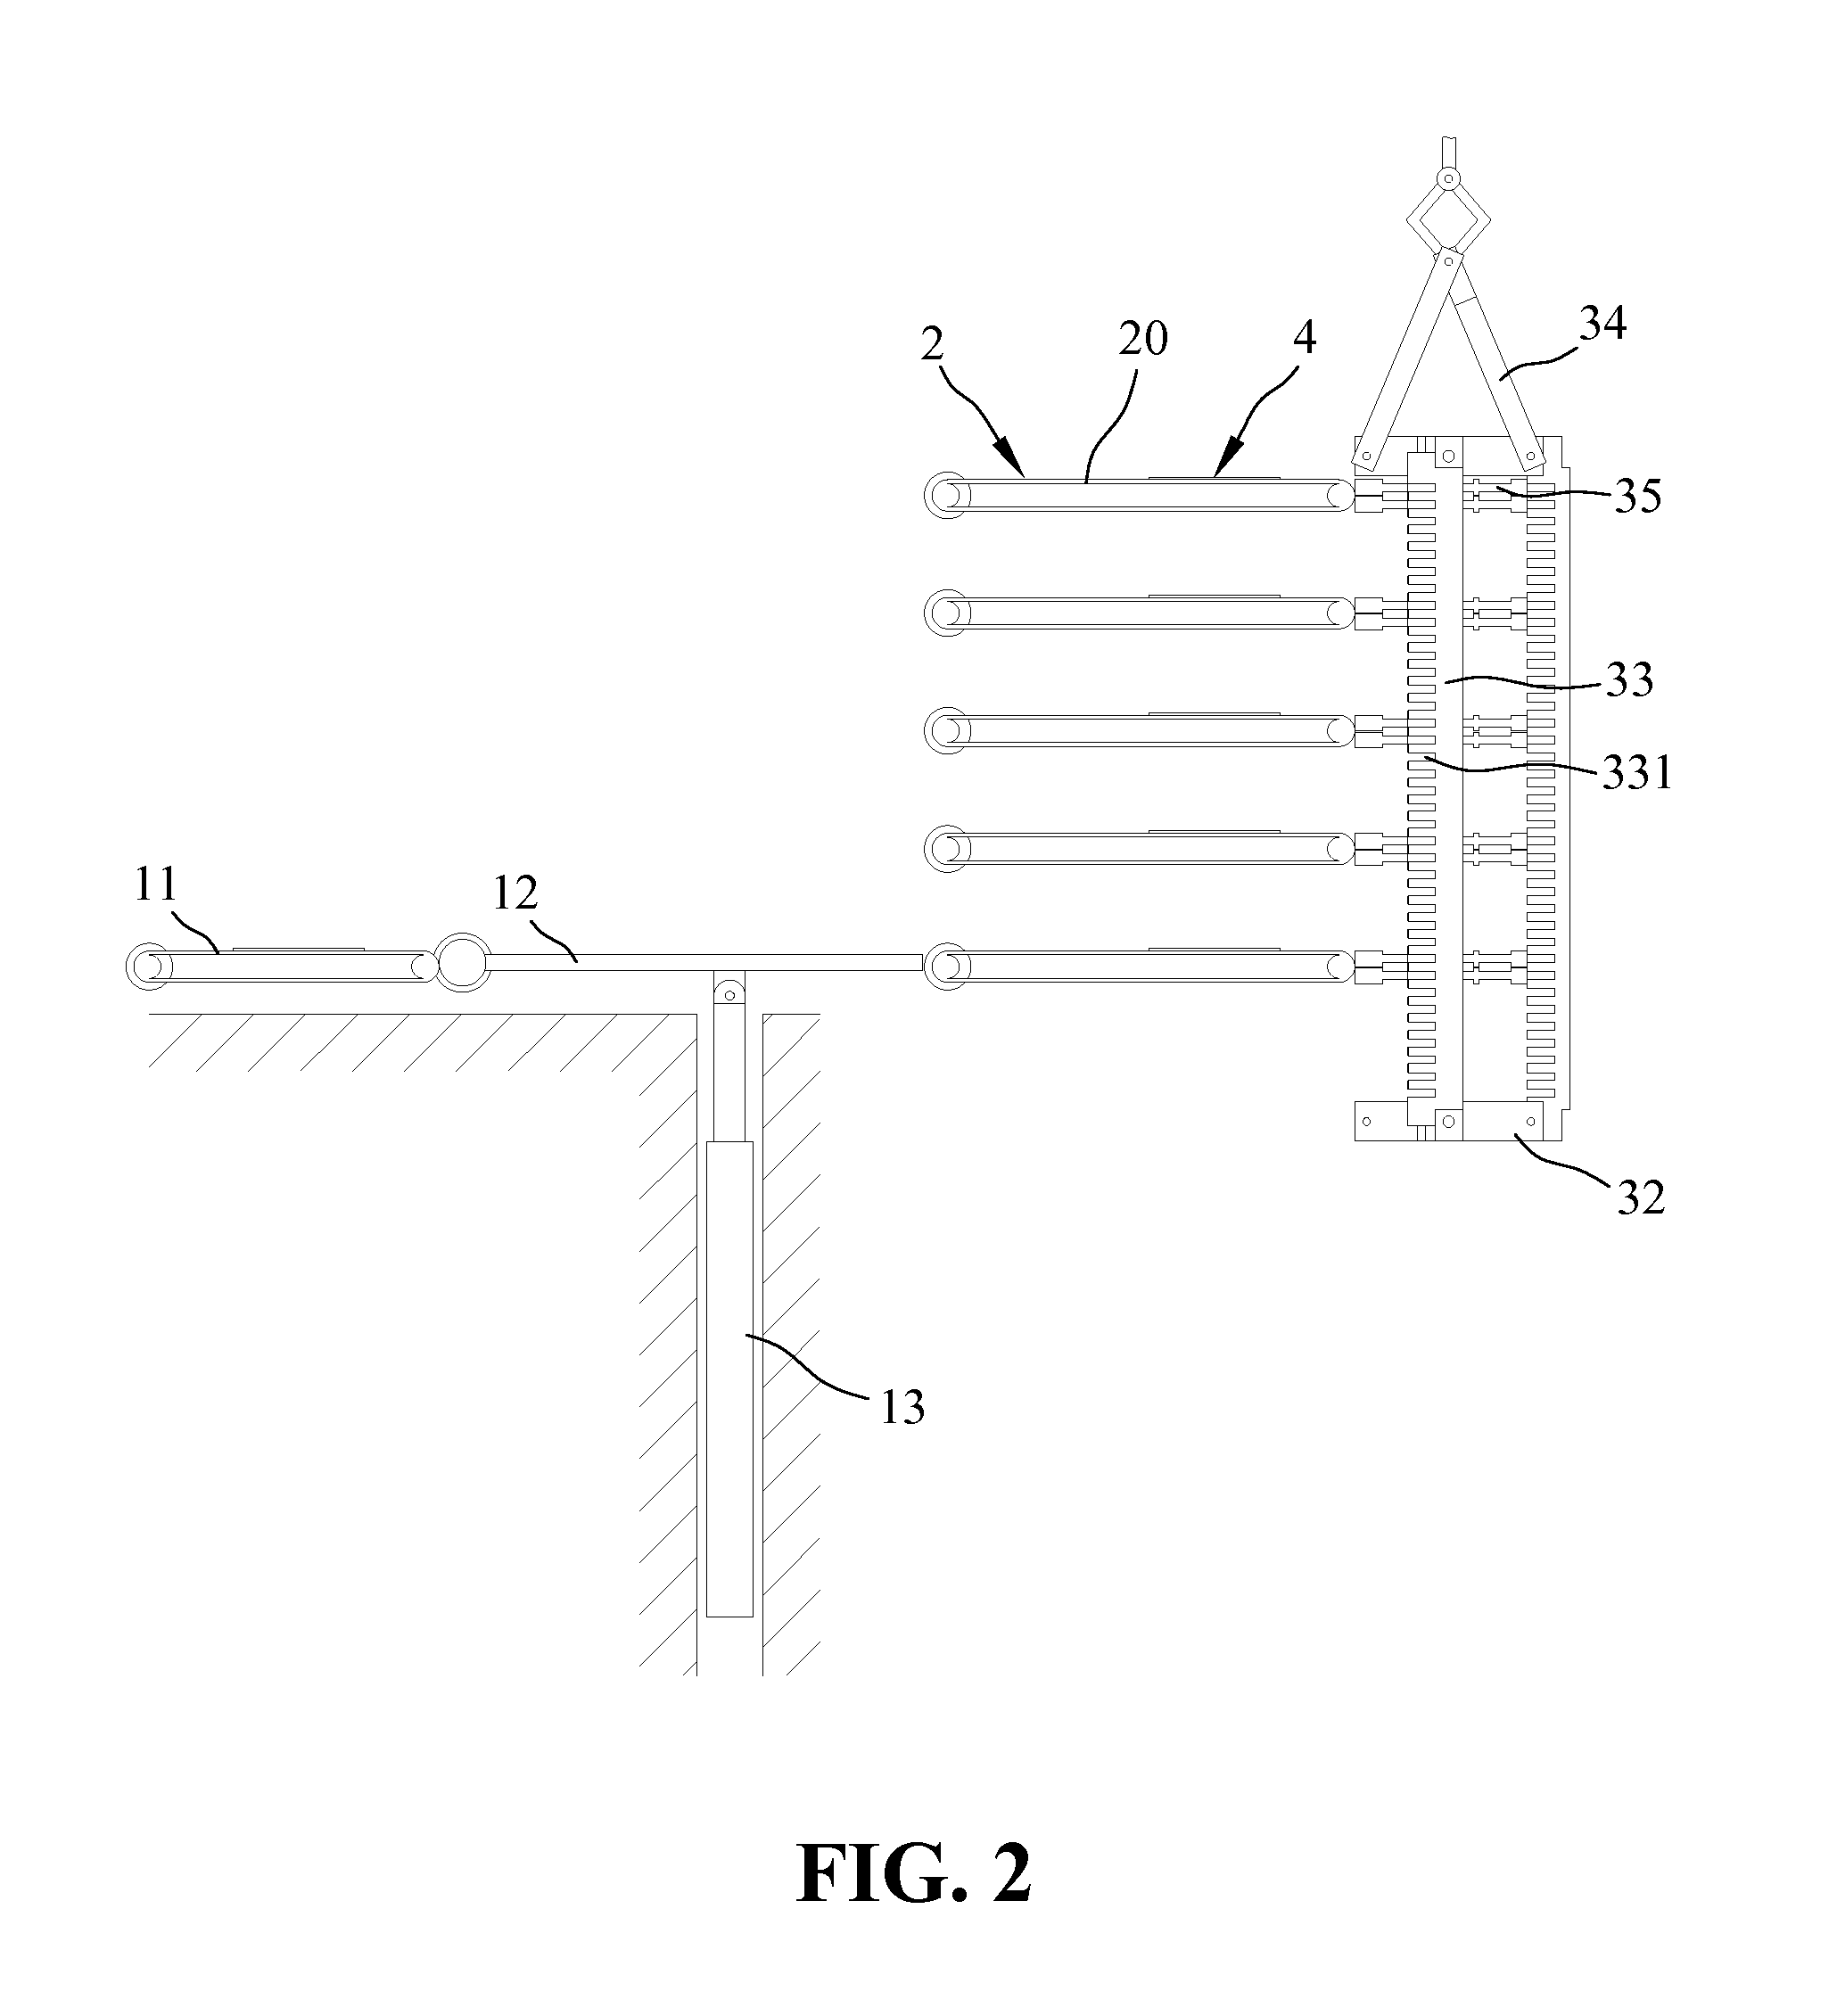 Apparatus for stacking electrode plates